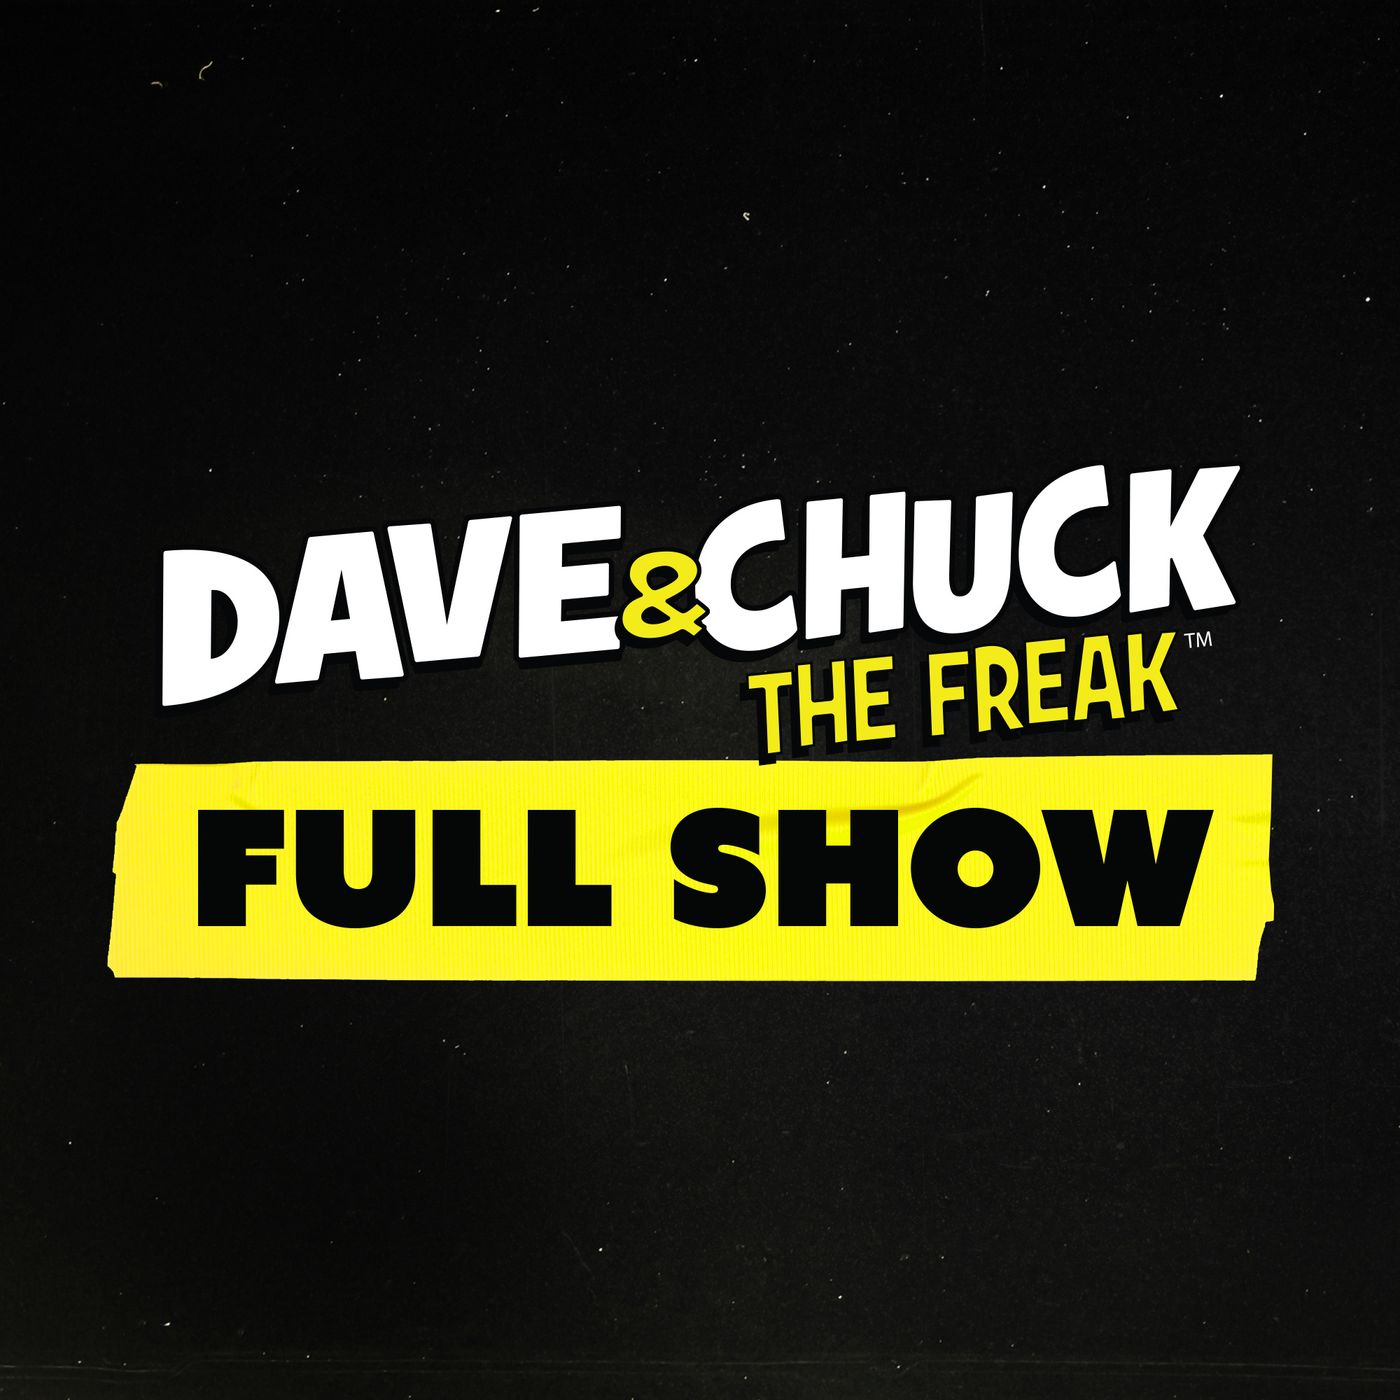 Friday, December 30th 2022 Dave & Chuck the Freak Podcast